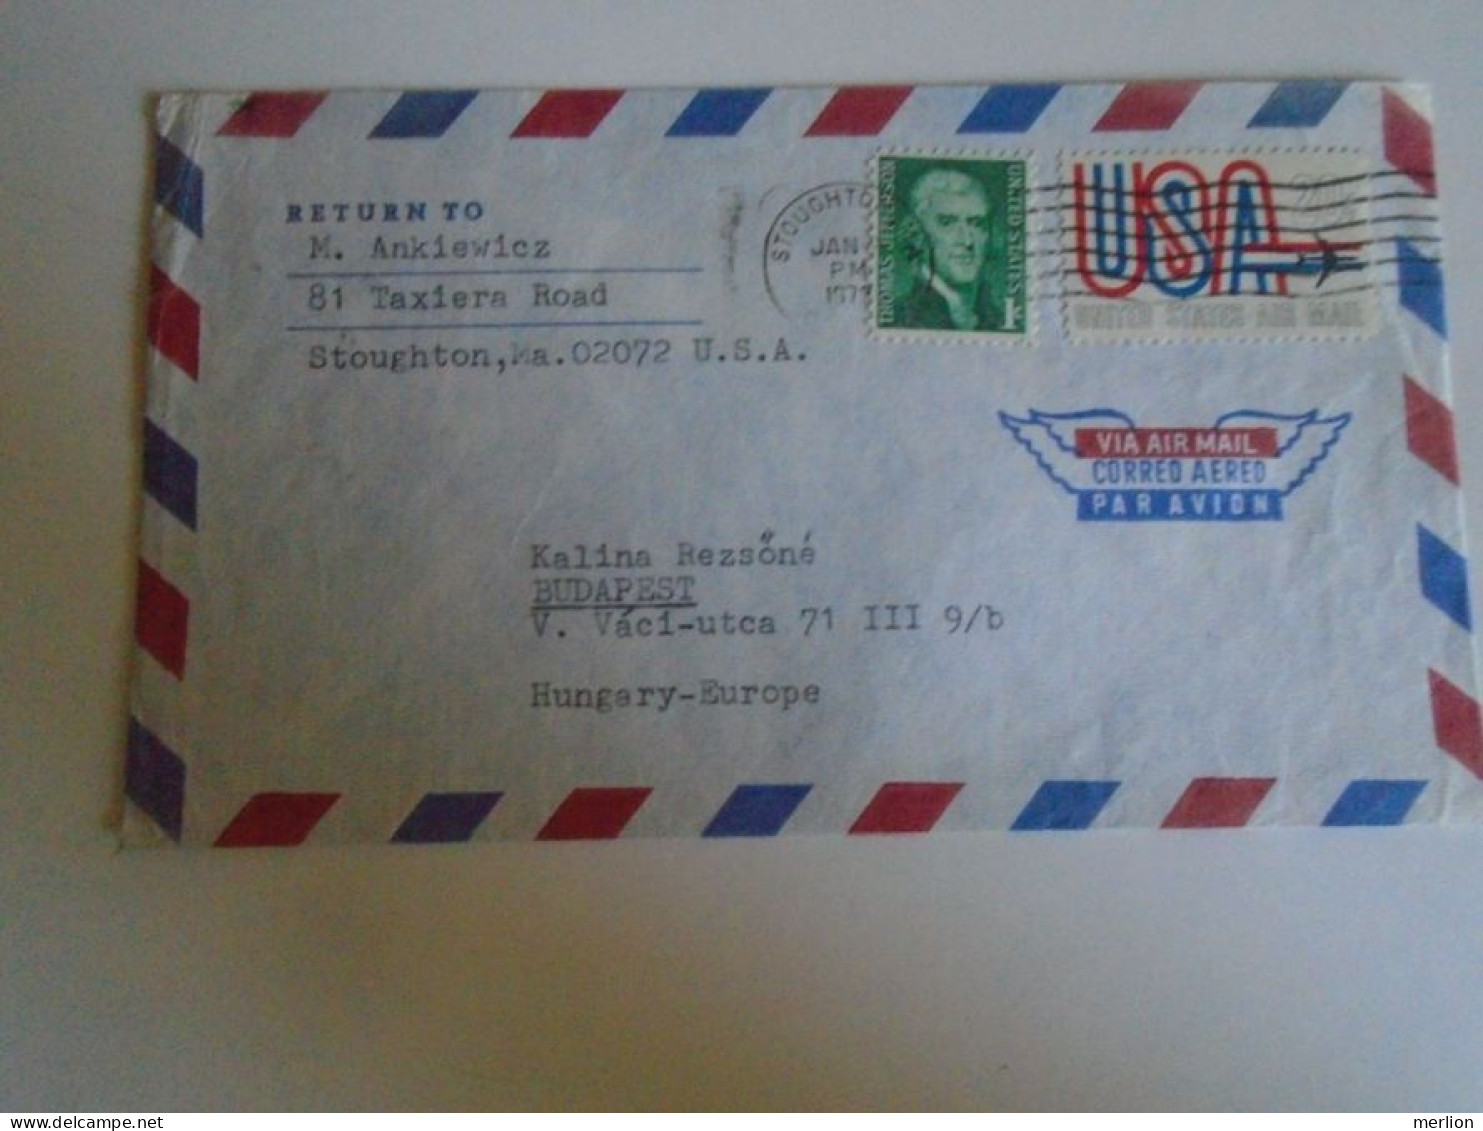 ZA490.25  USA Airmail Cover  1972 Stoughton Ma.   Ankiewicz  Sent To Hungary - Covers & Documents